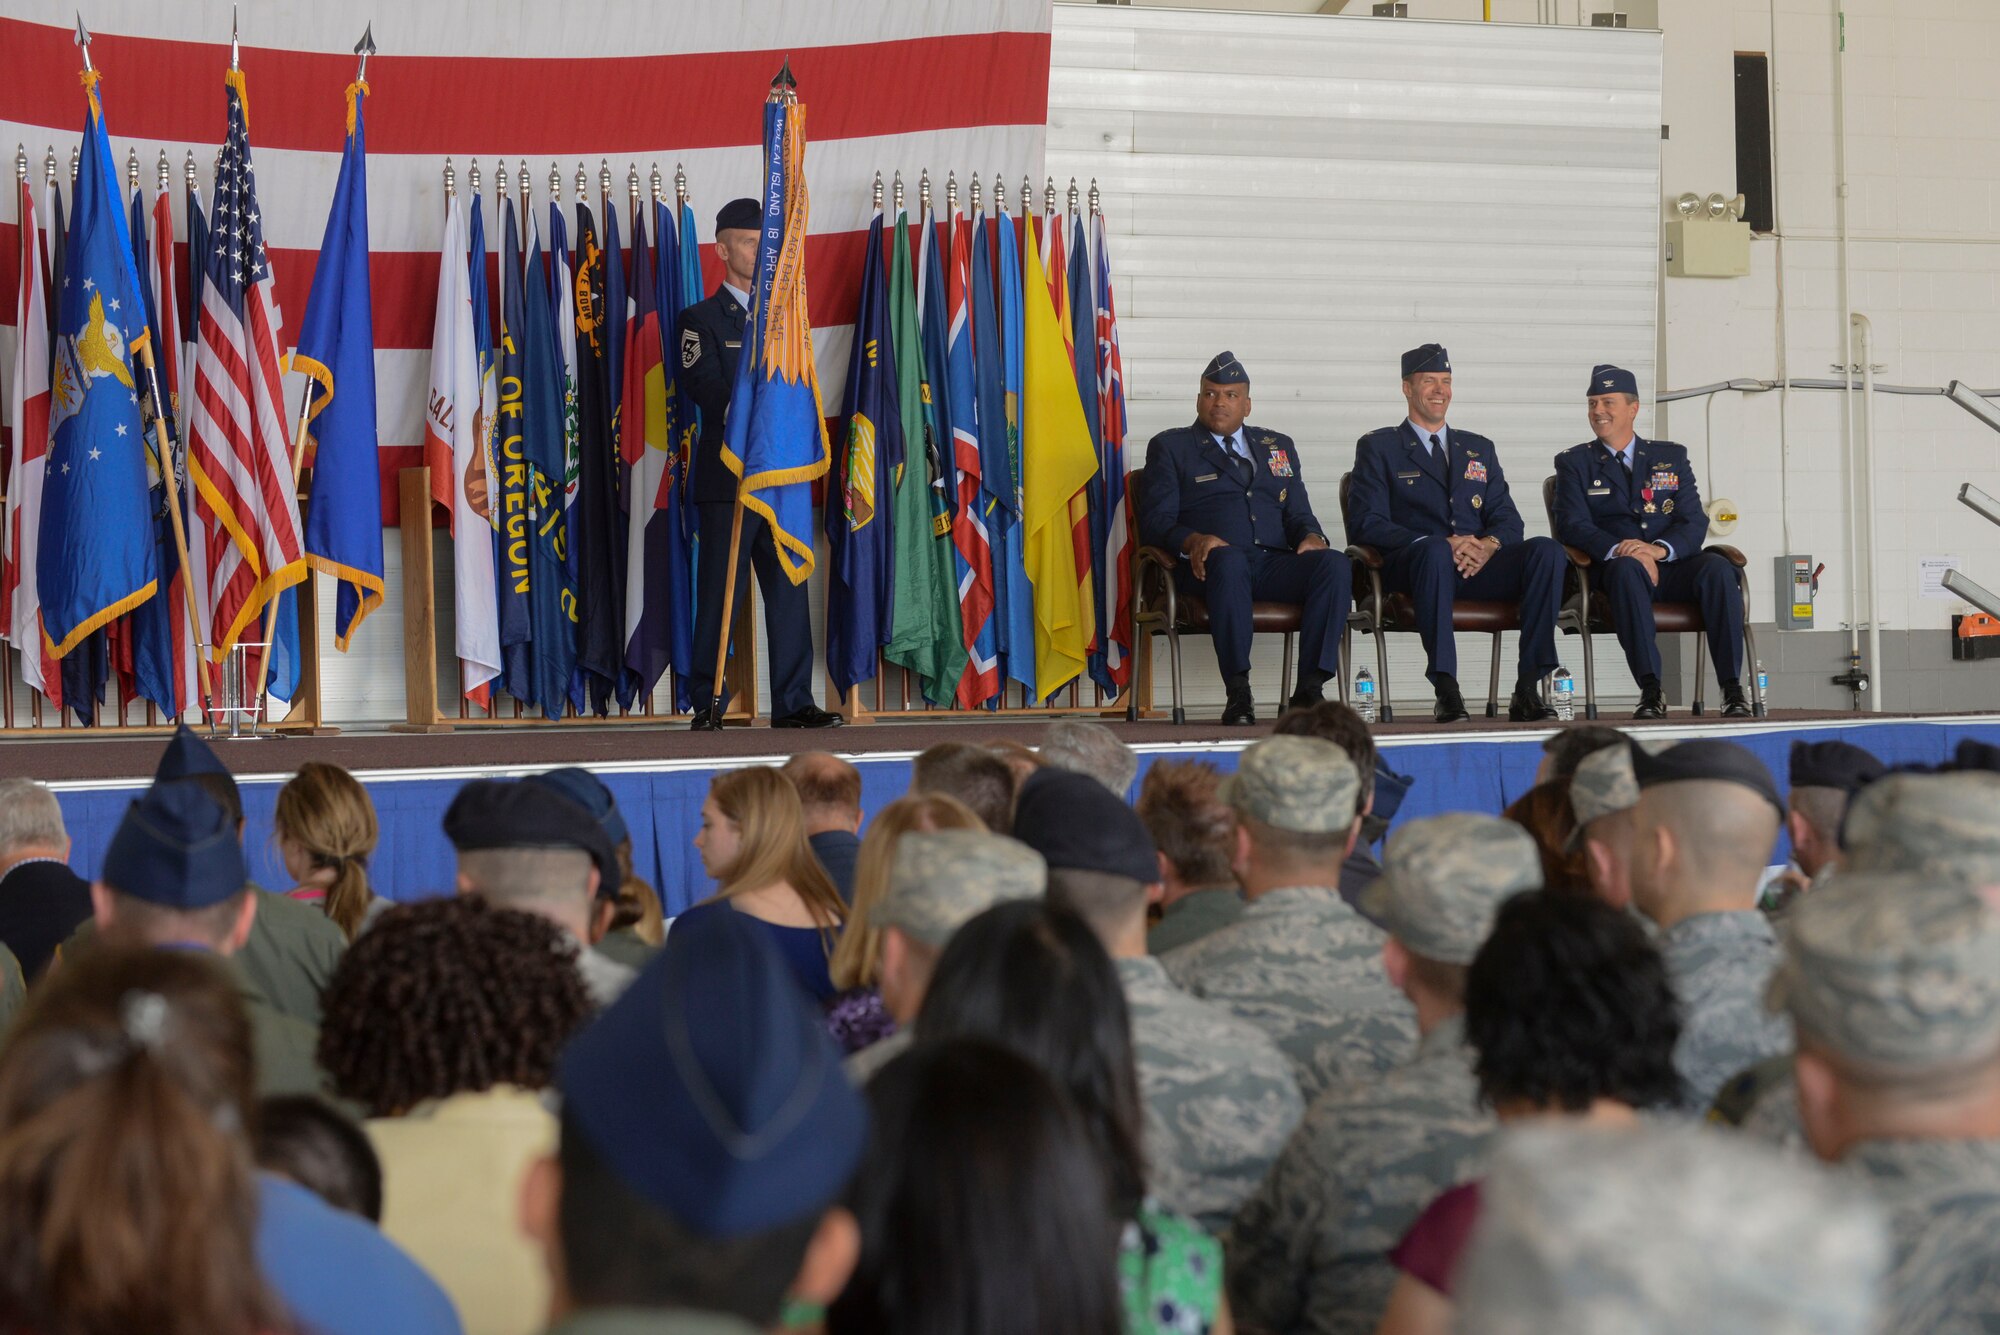 The official party listens to the narrator during the 5th Bomb Wing change of command ceremony at Minot Air Force Base, N.D., June 3, 2016. Col. Matthew Brooks replaced Col. Jason Armagost as the 54th commander and recently served as the vice wing commander at Whiteman Air Force Base, Mo. (U.S. Air Force photo/Airman 1st Class Jessica Weissman)